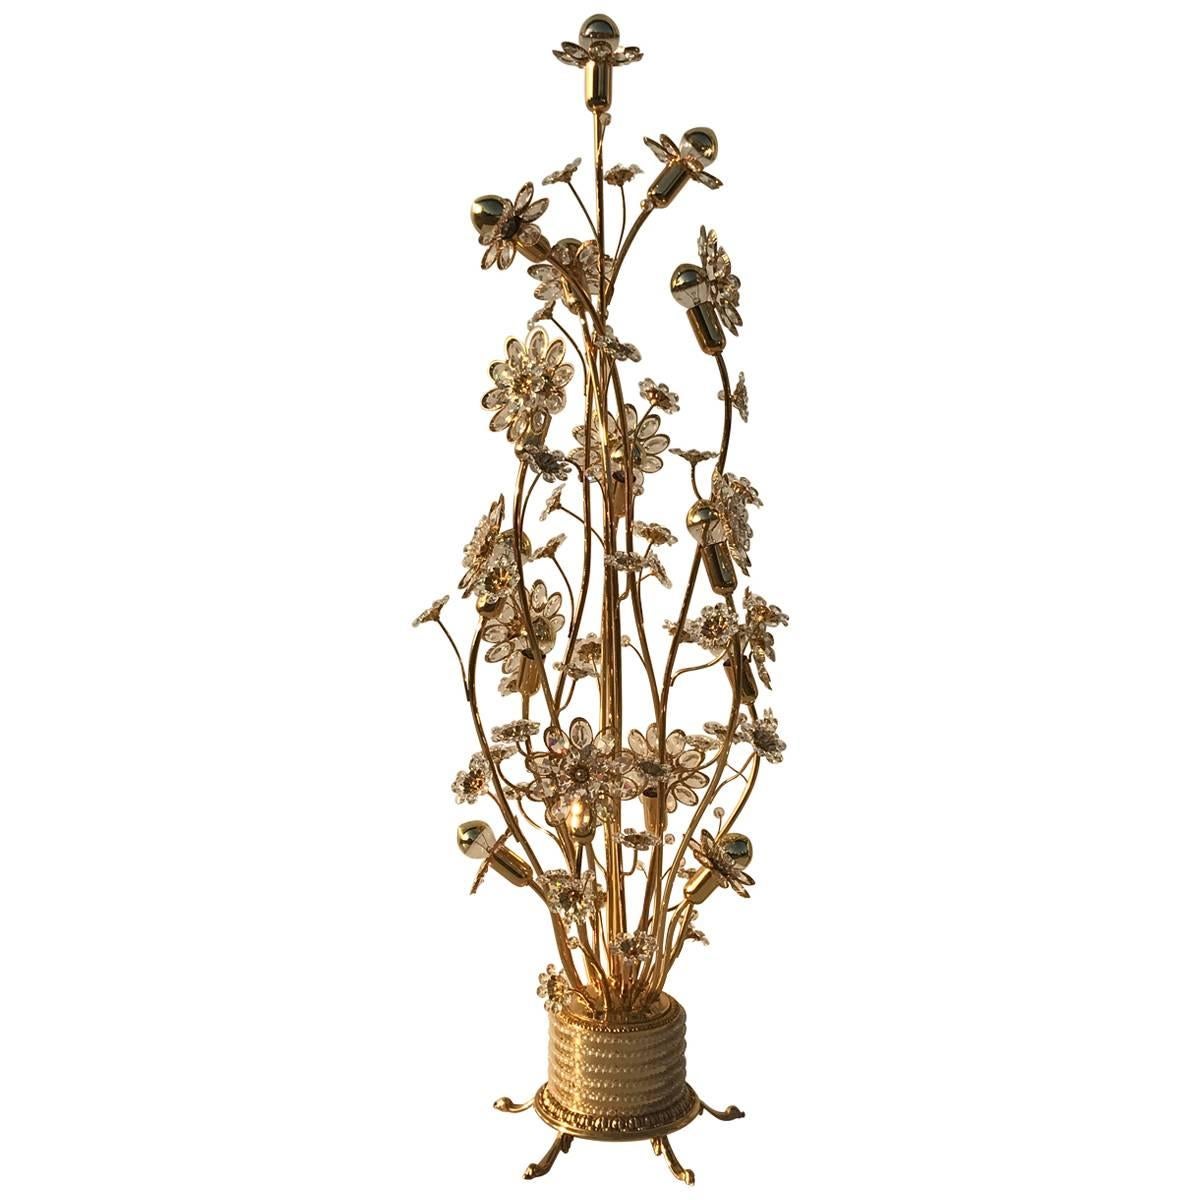 Enchanting Illuminated Crystal Flower and Brass Floor Lamp by Palwa